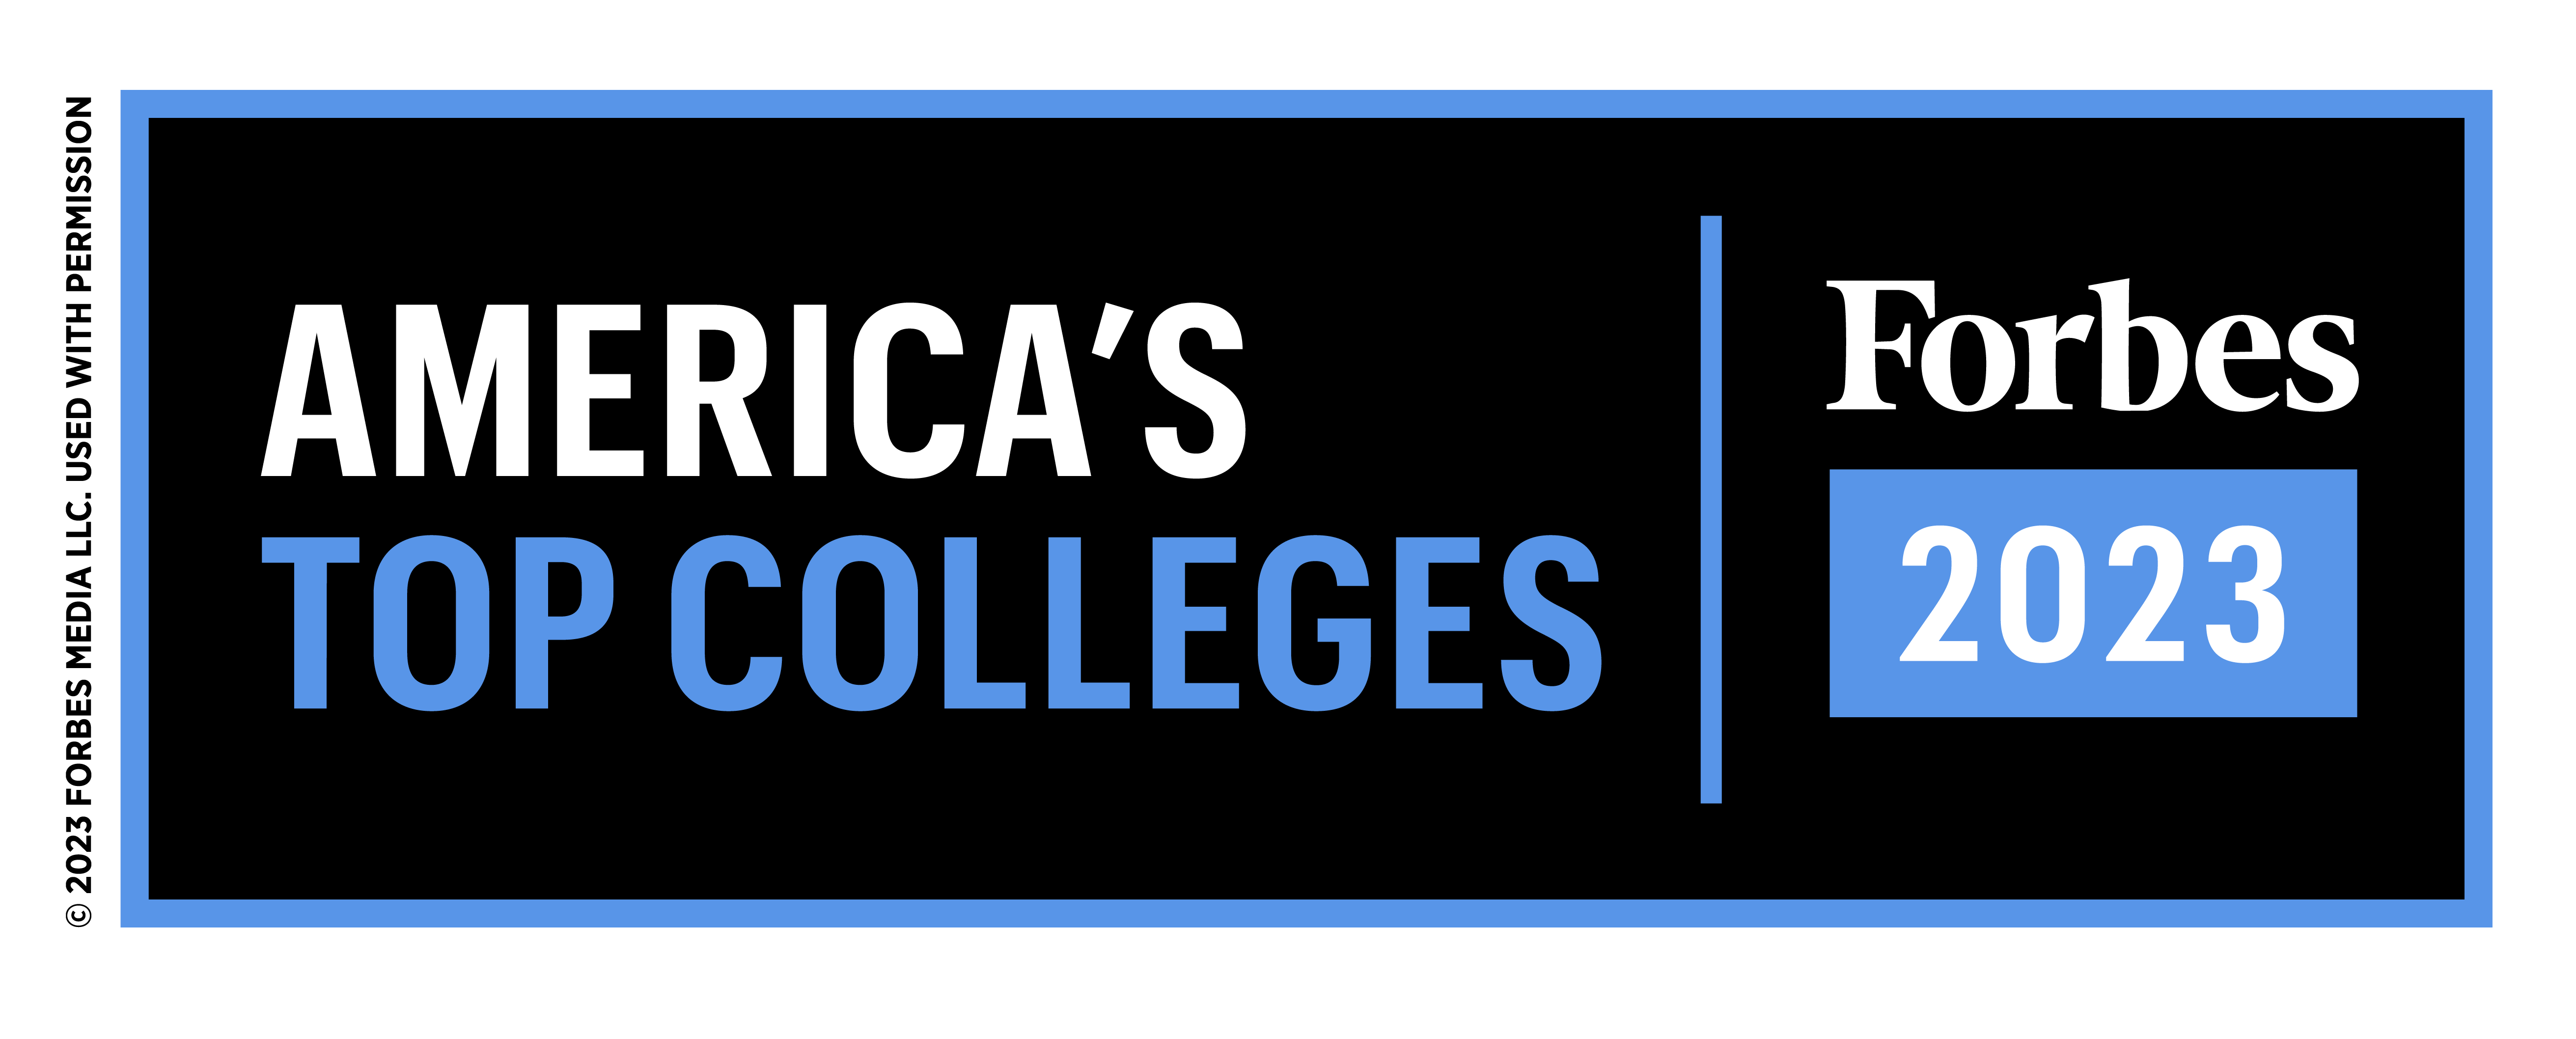 Forbes America's Top Colleges badge for 2023